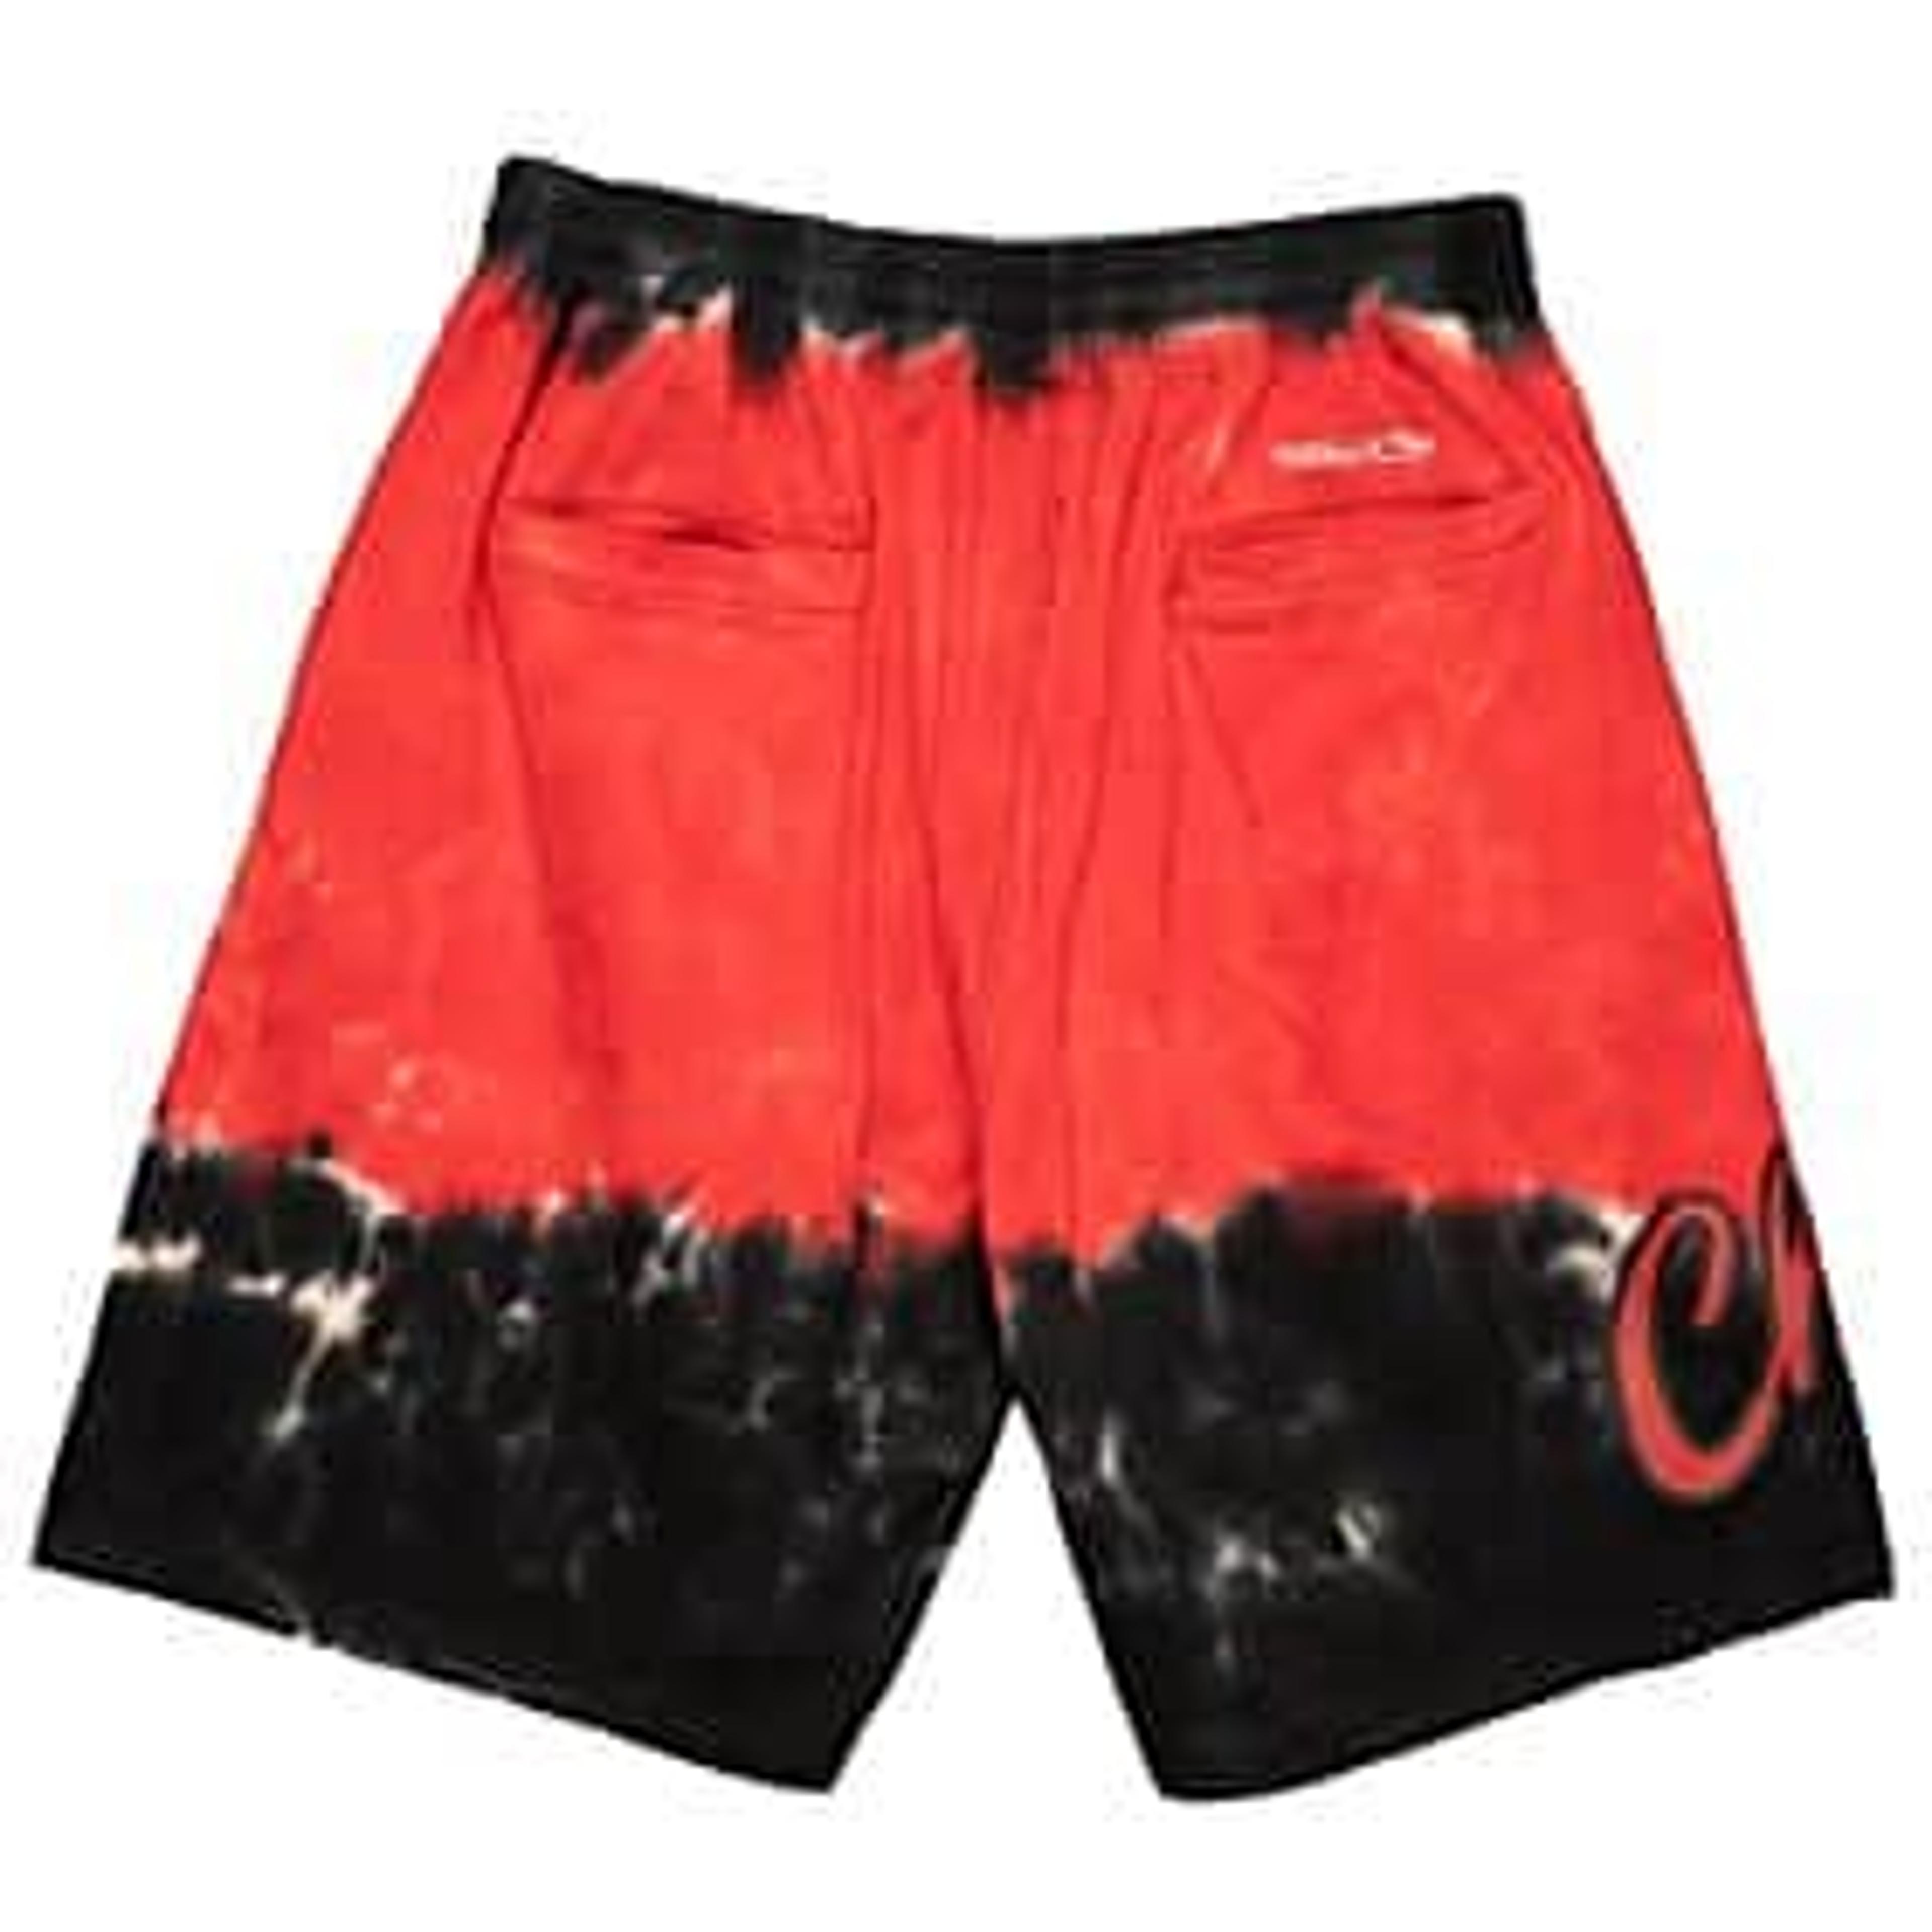 Alternate View 1 of Tie-Dye Terry Shorts Chicago Bulls